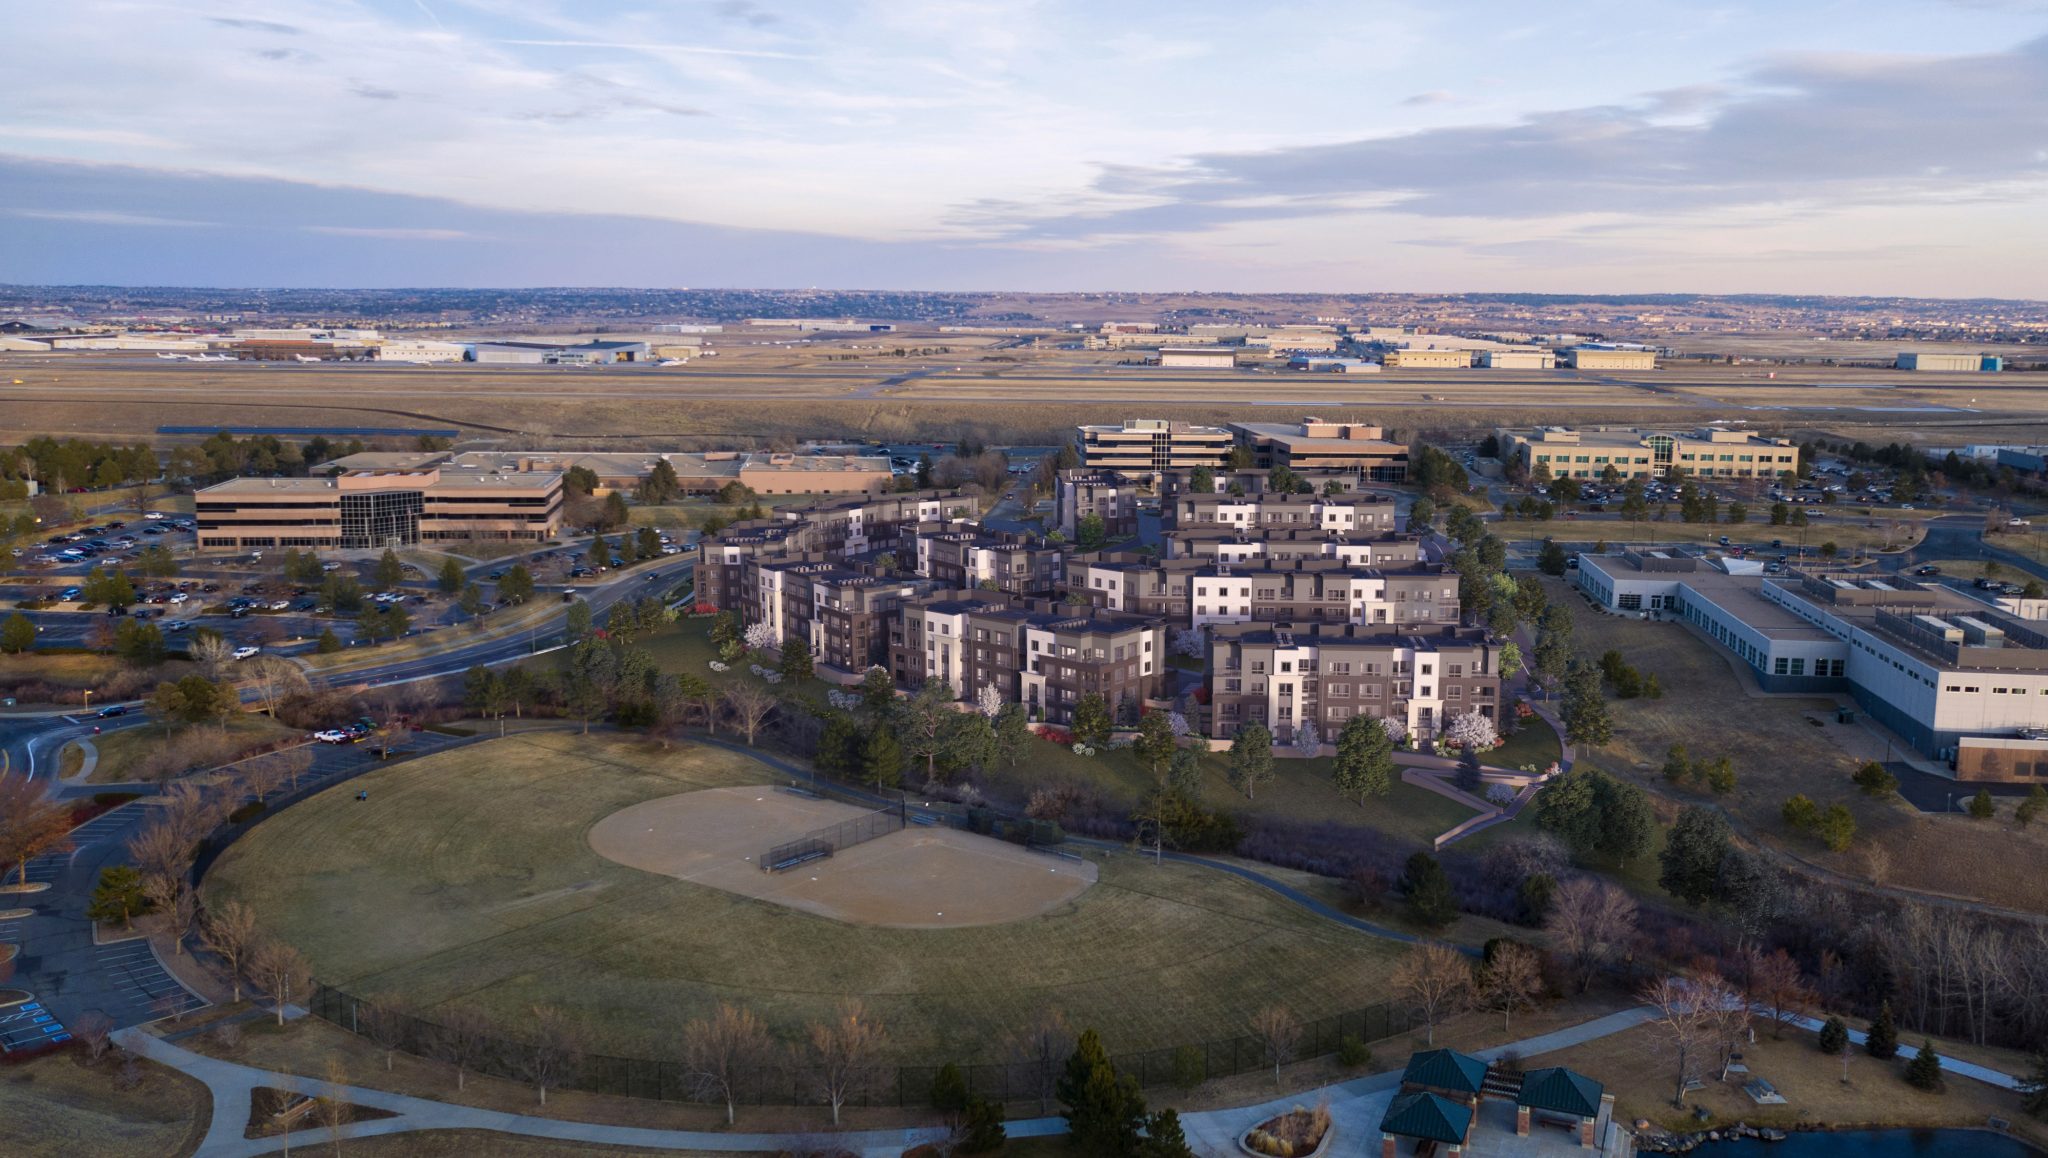 Aerial exterior of entire apartment complex with baseball fields in the foreground and horizon in background